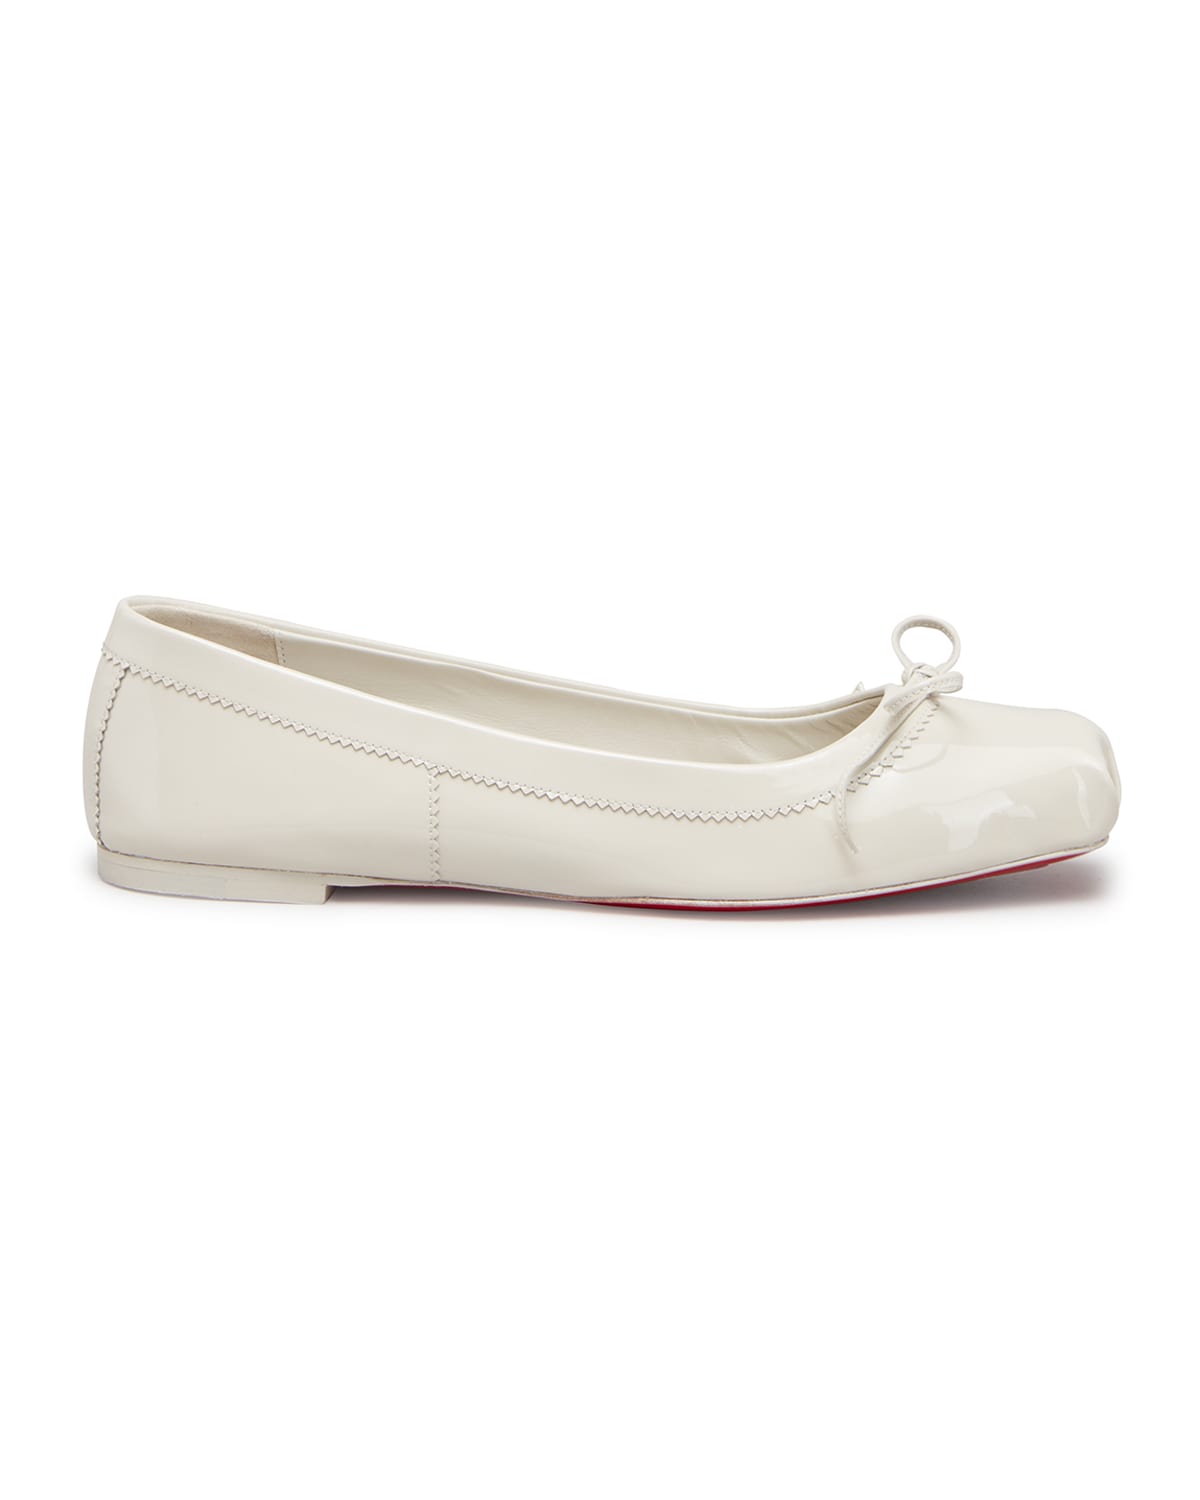 Christian Louboutin Mamadrague Patent Red Sole Ballet Flats